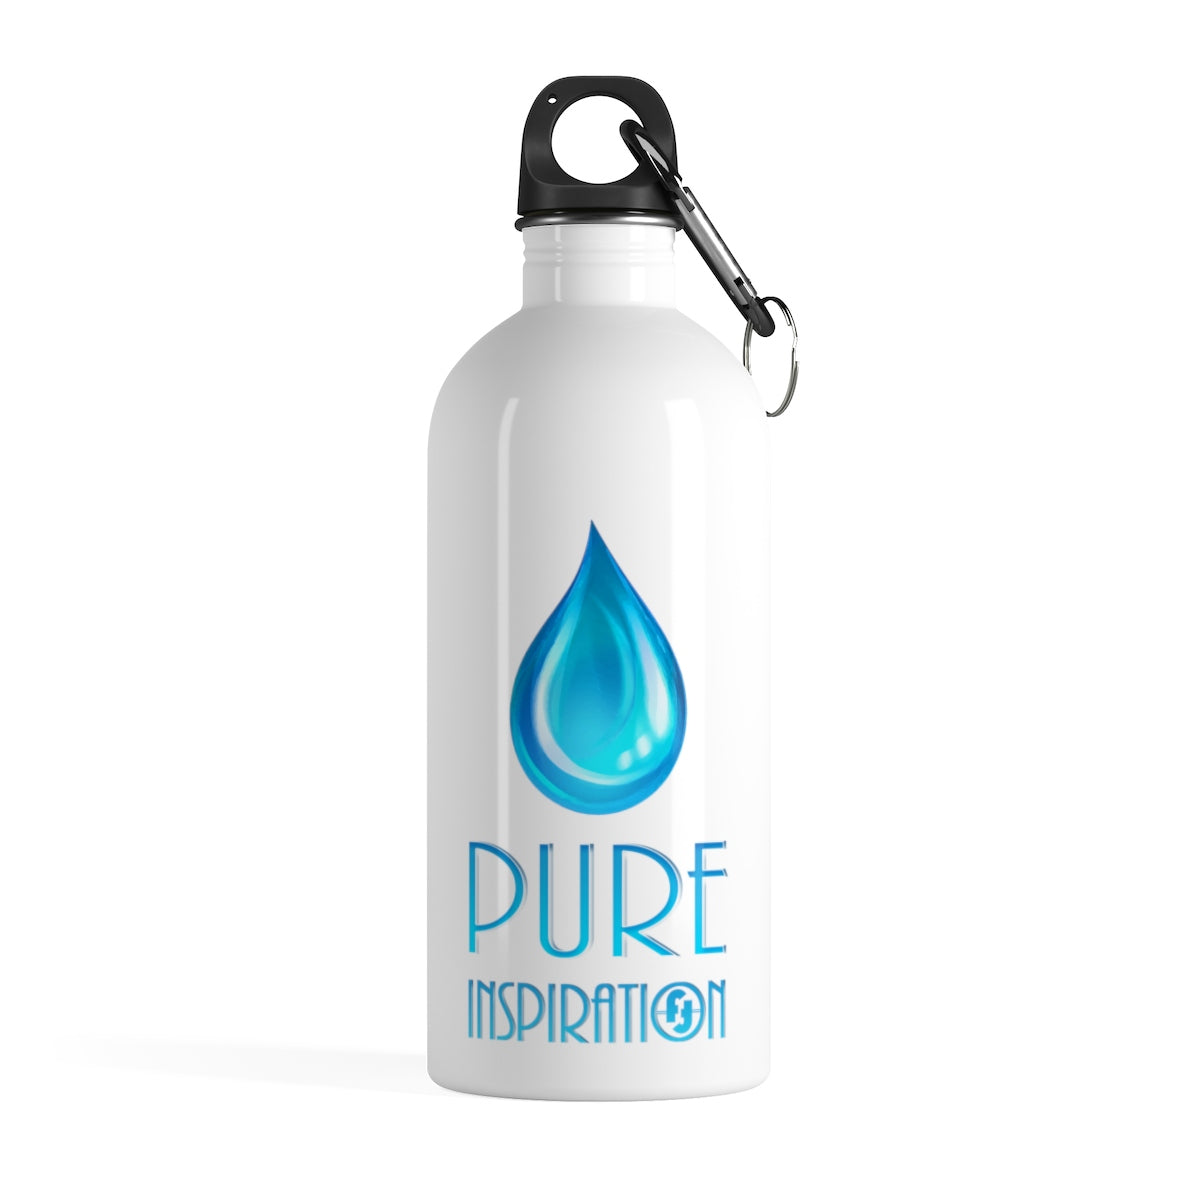 Pure Inspiration Stainless Steel Water Bottles Motivational Water Bottles + Carabiner & Key Chain Ring 14 oz